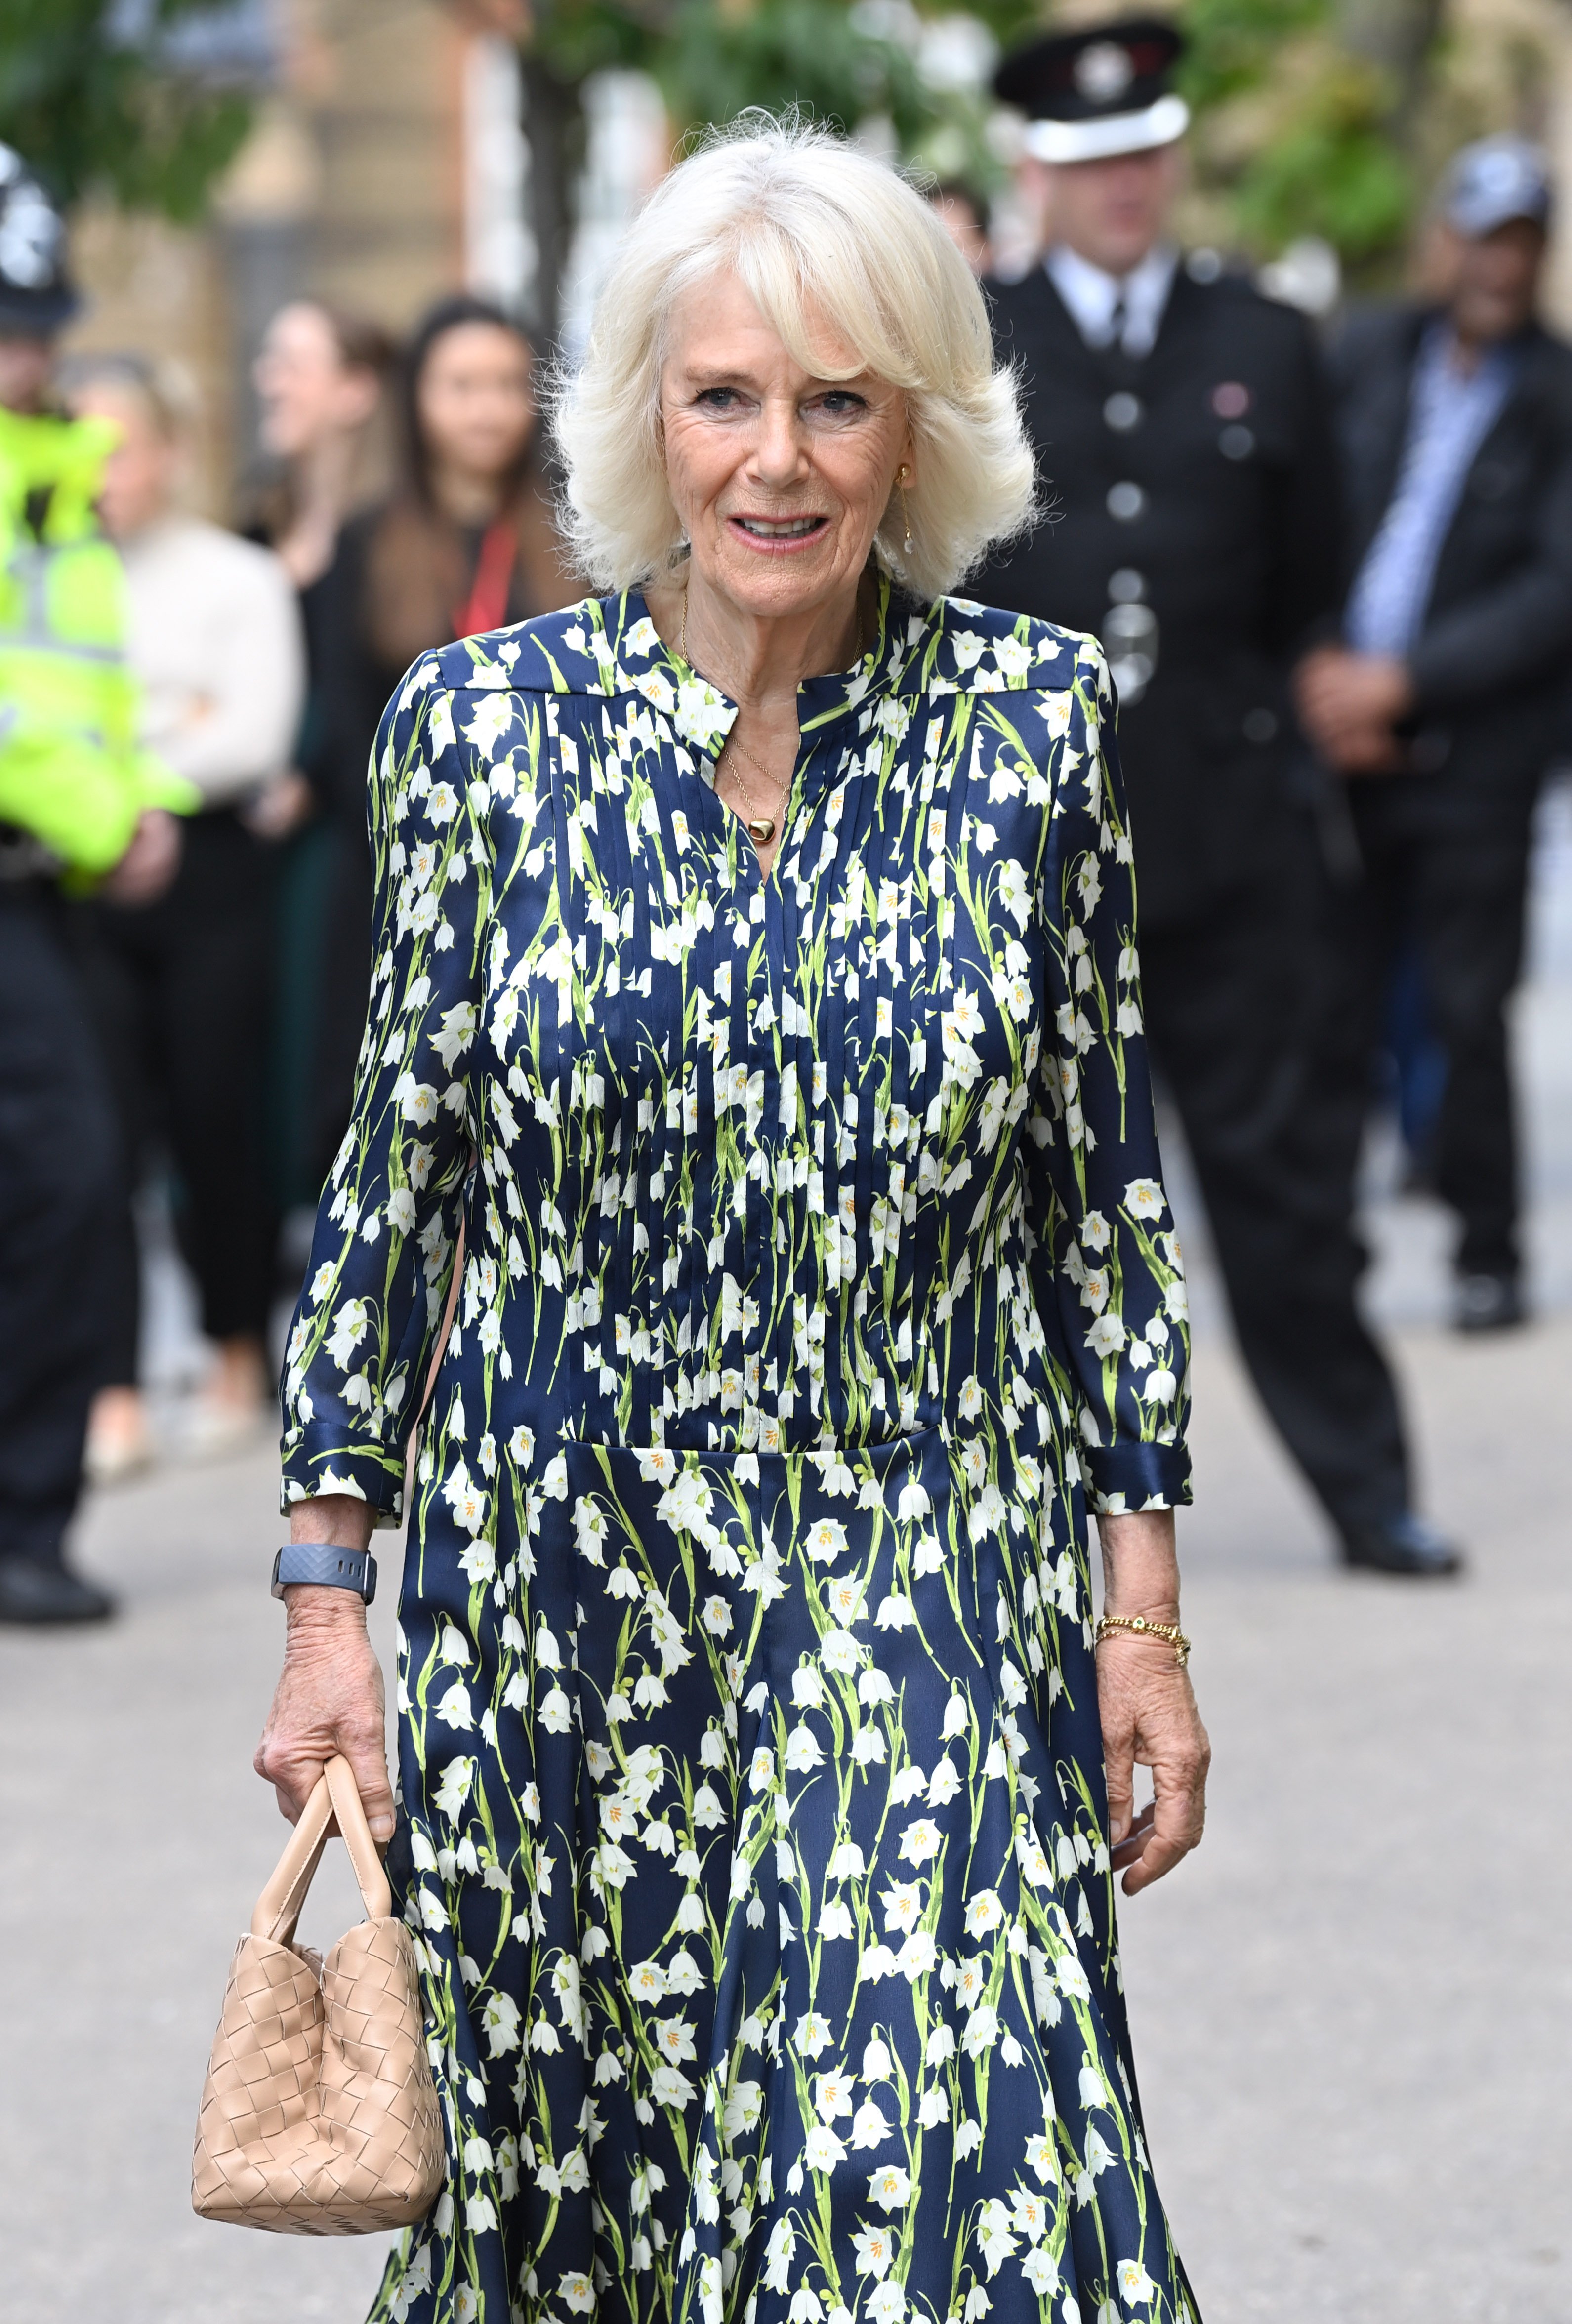 Camilla, Duchess of Cornwall during a visit to Clapham old town with Prince Charles, Prince of Wales on May 27, 2021 in Clapham, England | Source: Getty Images